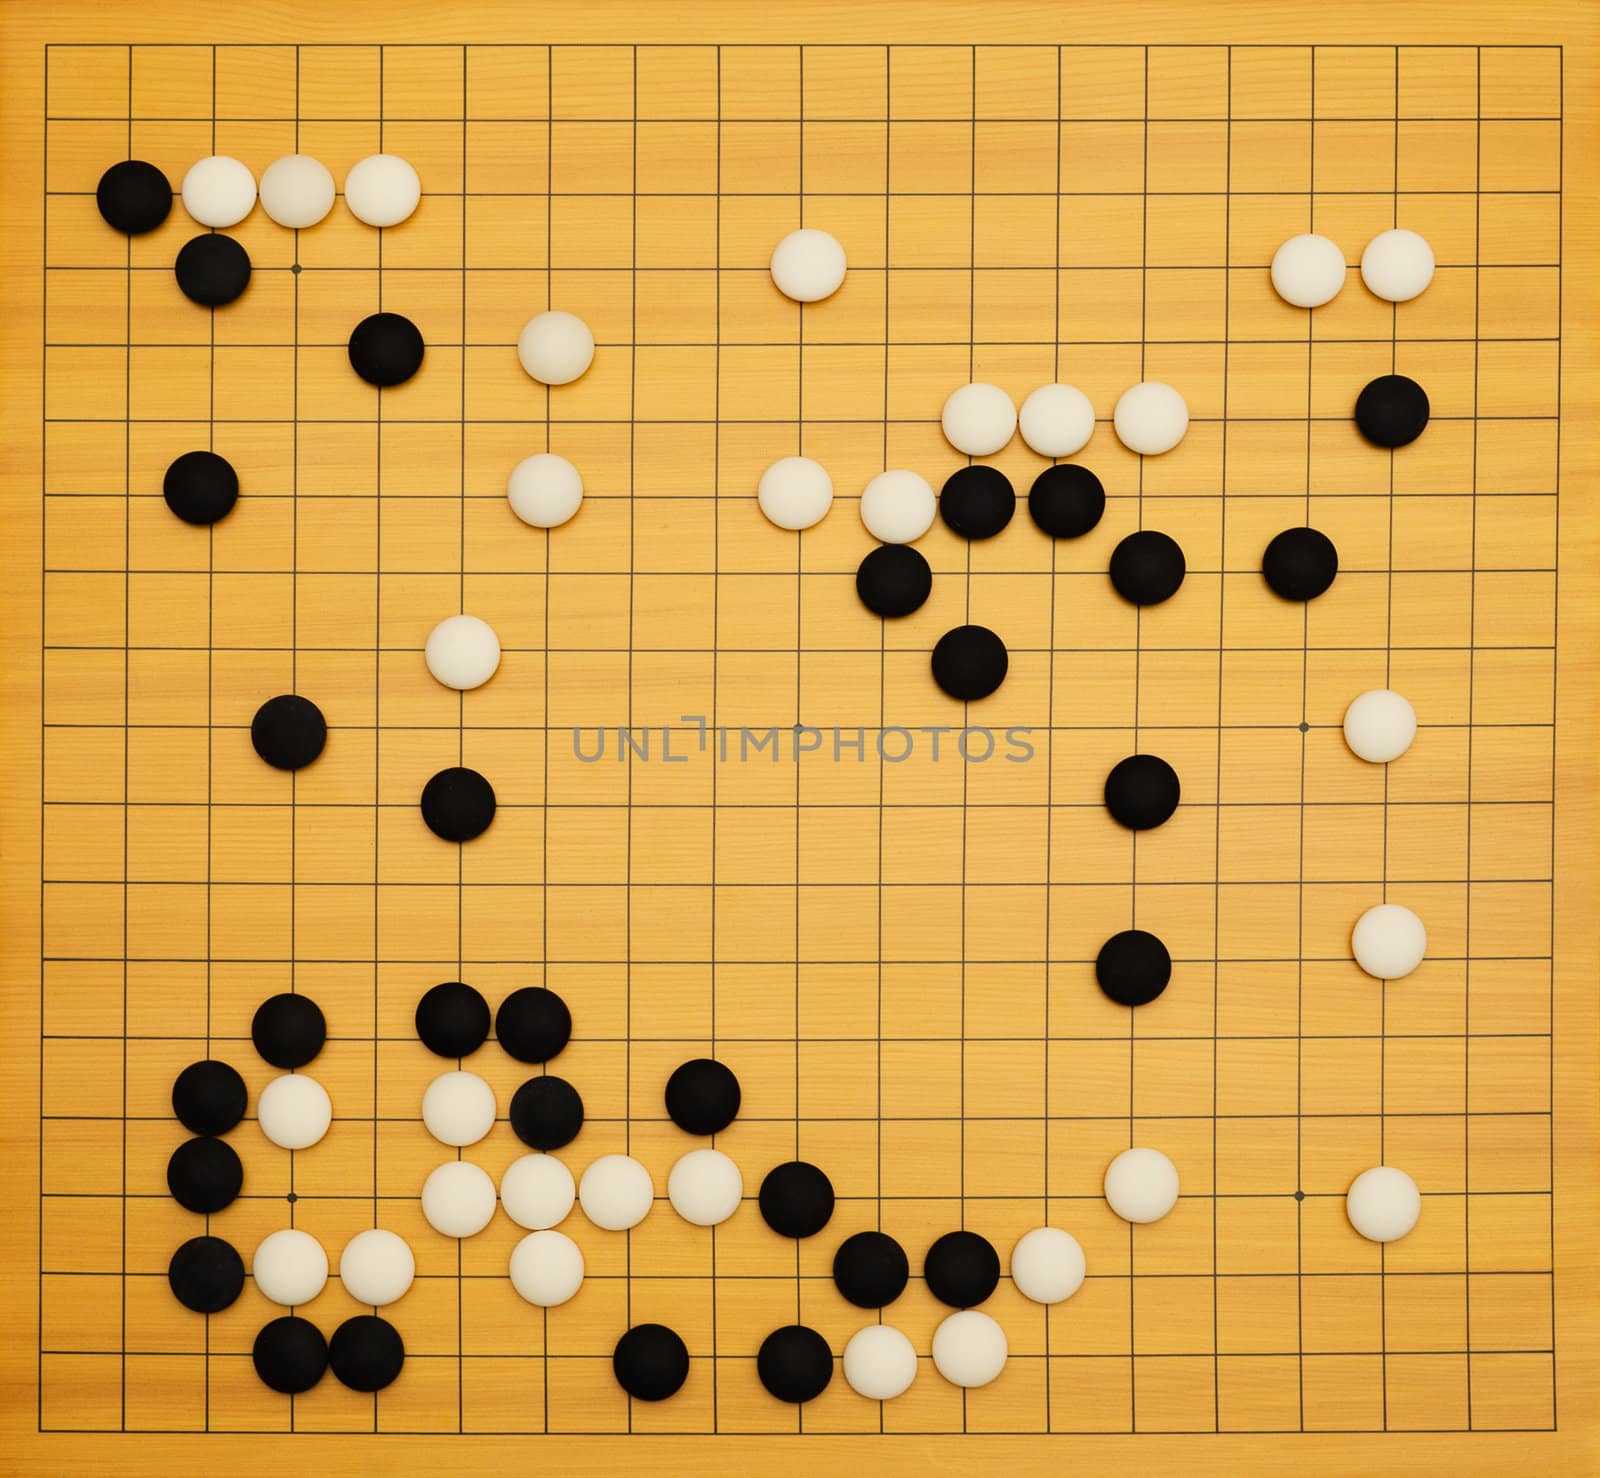 Game of go top view by nprause